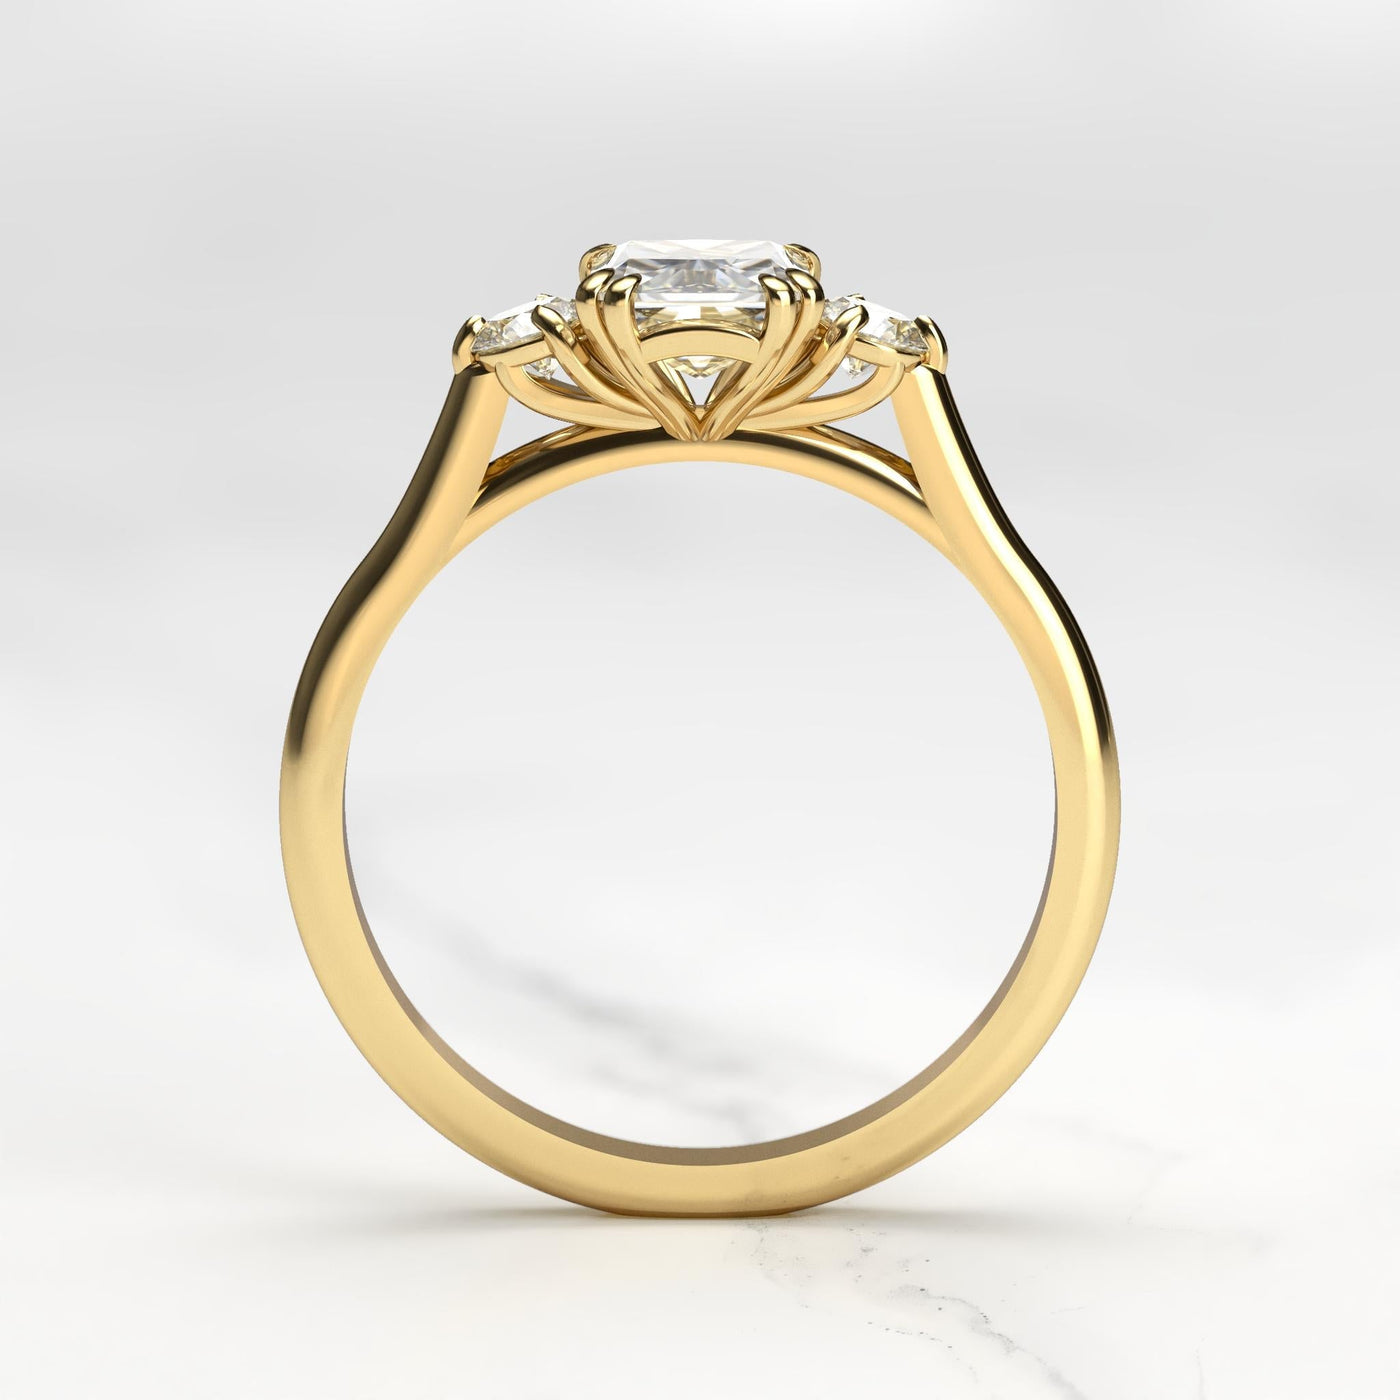 Radiant-cut diamond ring with accent stones